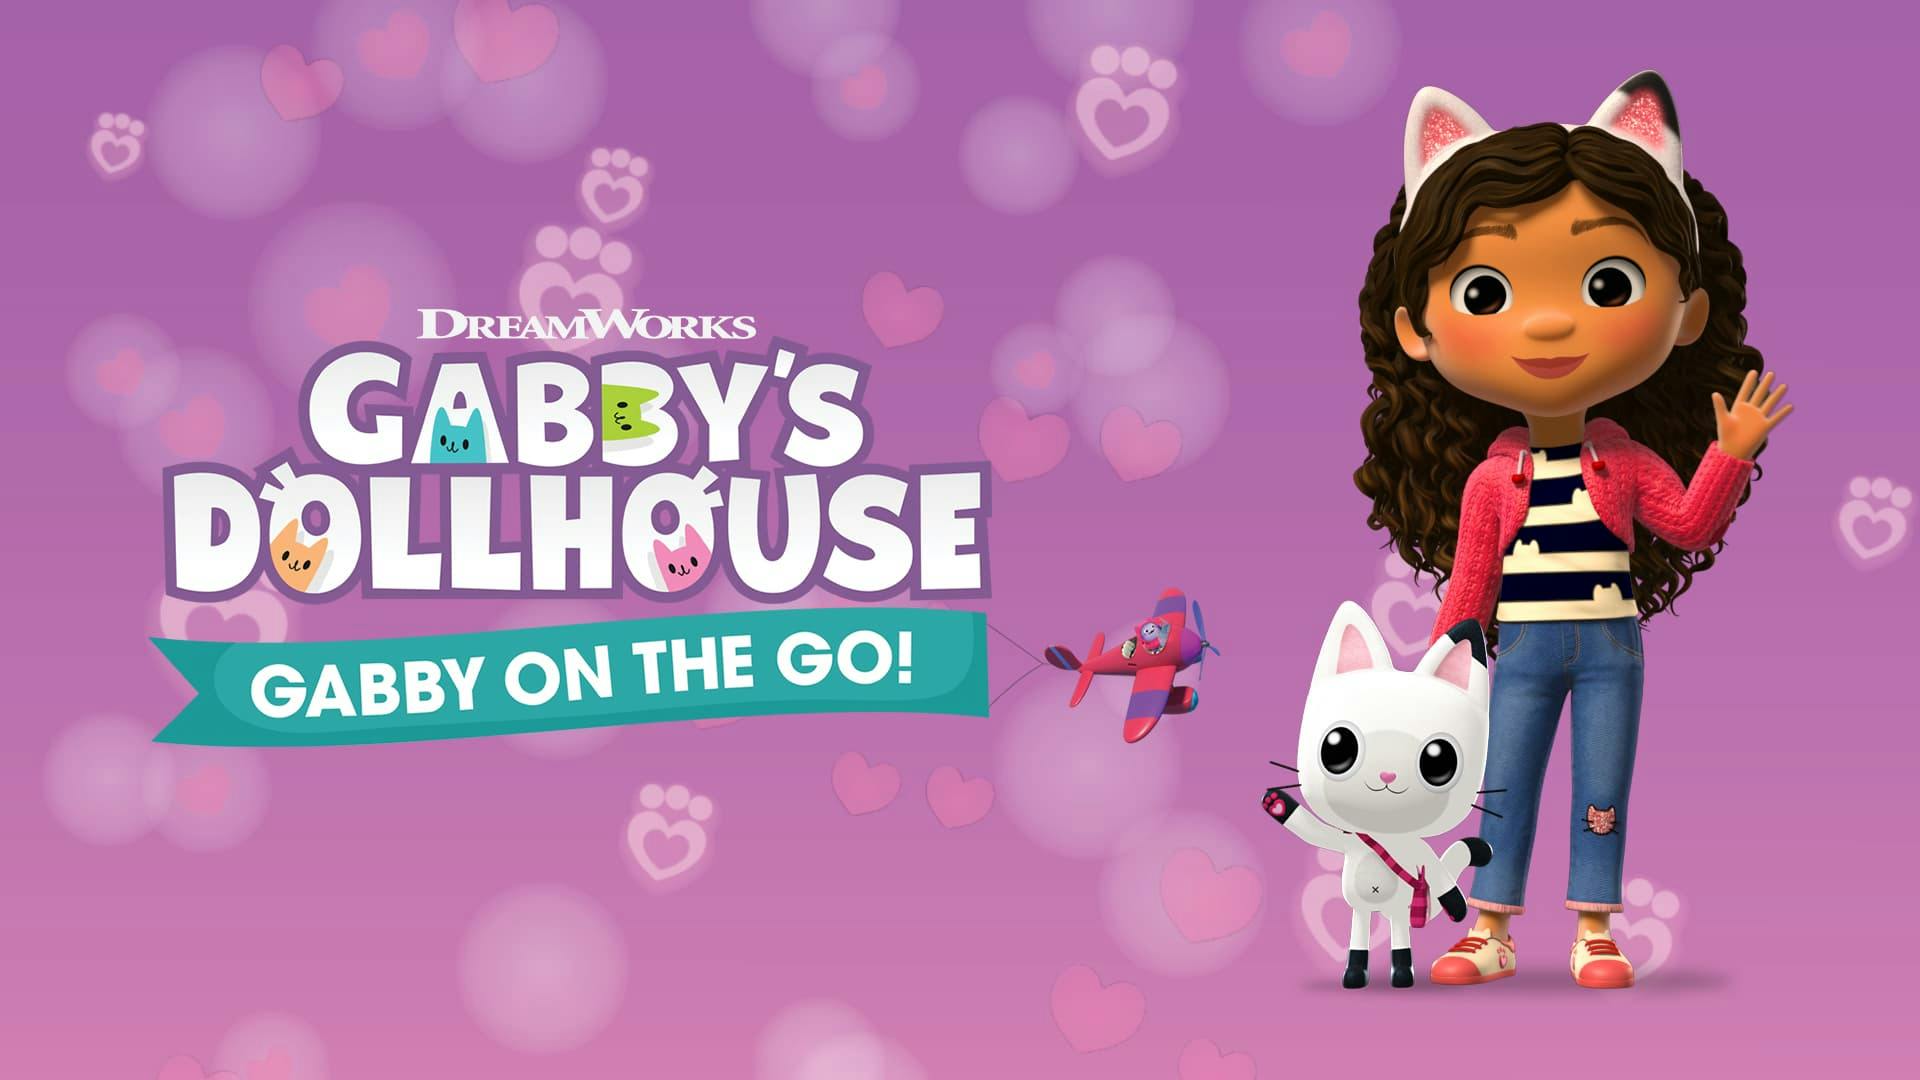 Gabby from DreamWorks Gabby's Dollhouse stand waving next to a logo for Gabby on the Go